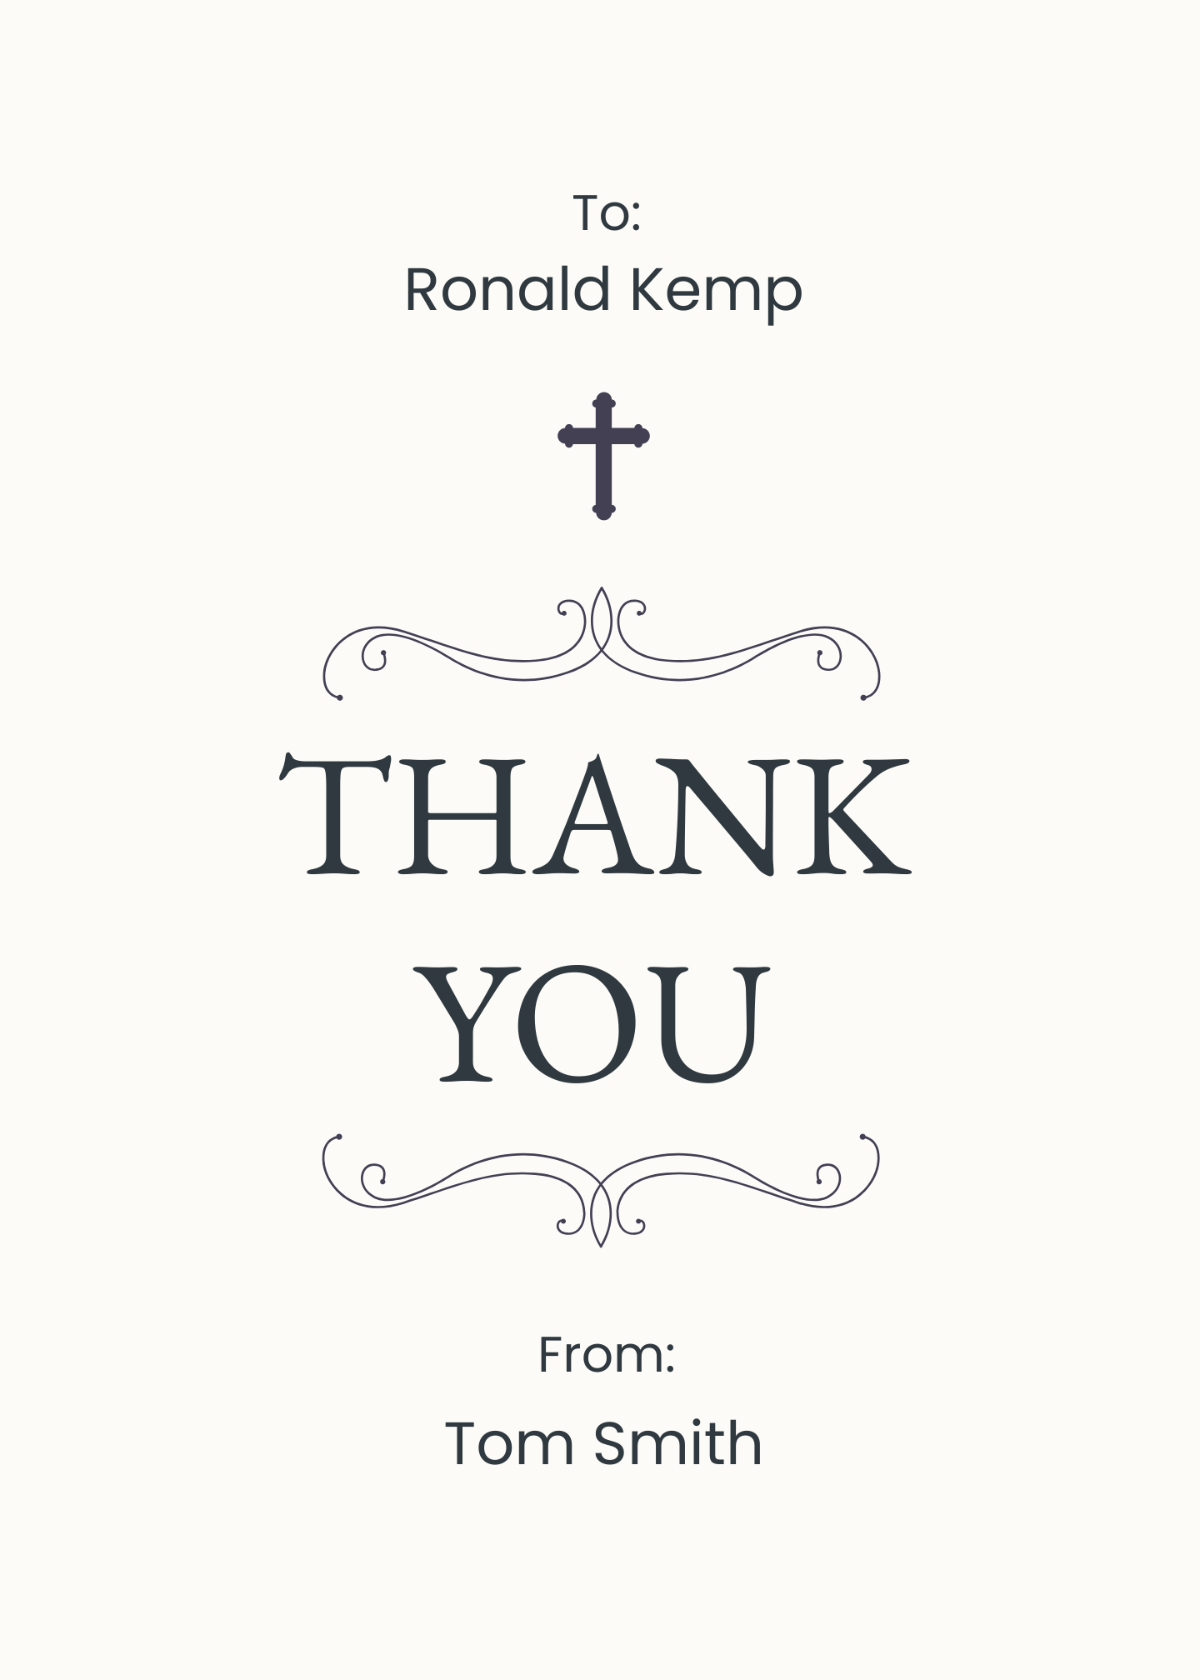 Simple Funeral Photo Thank You Card Template